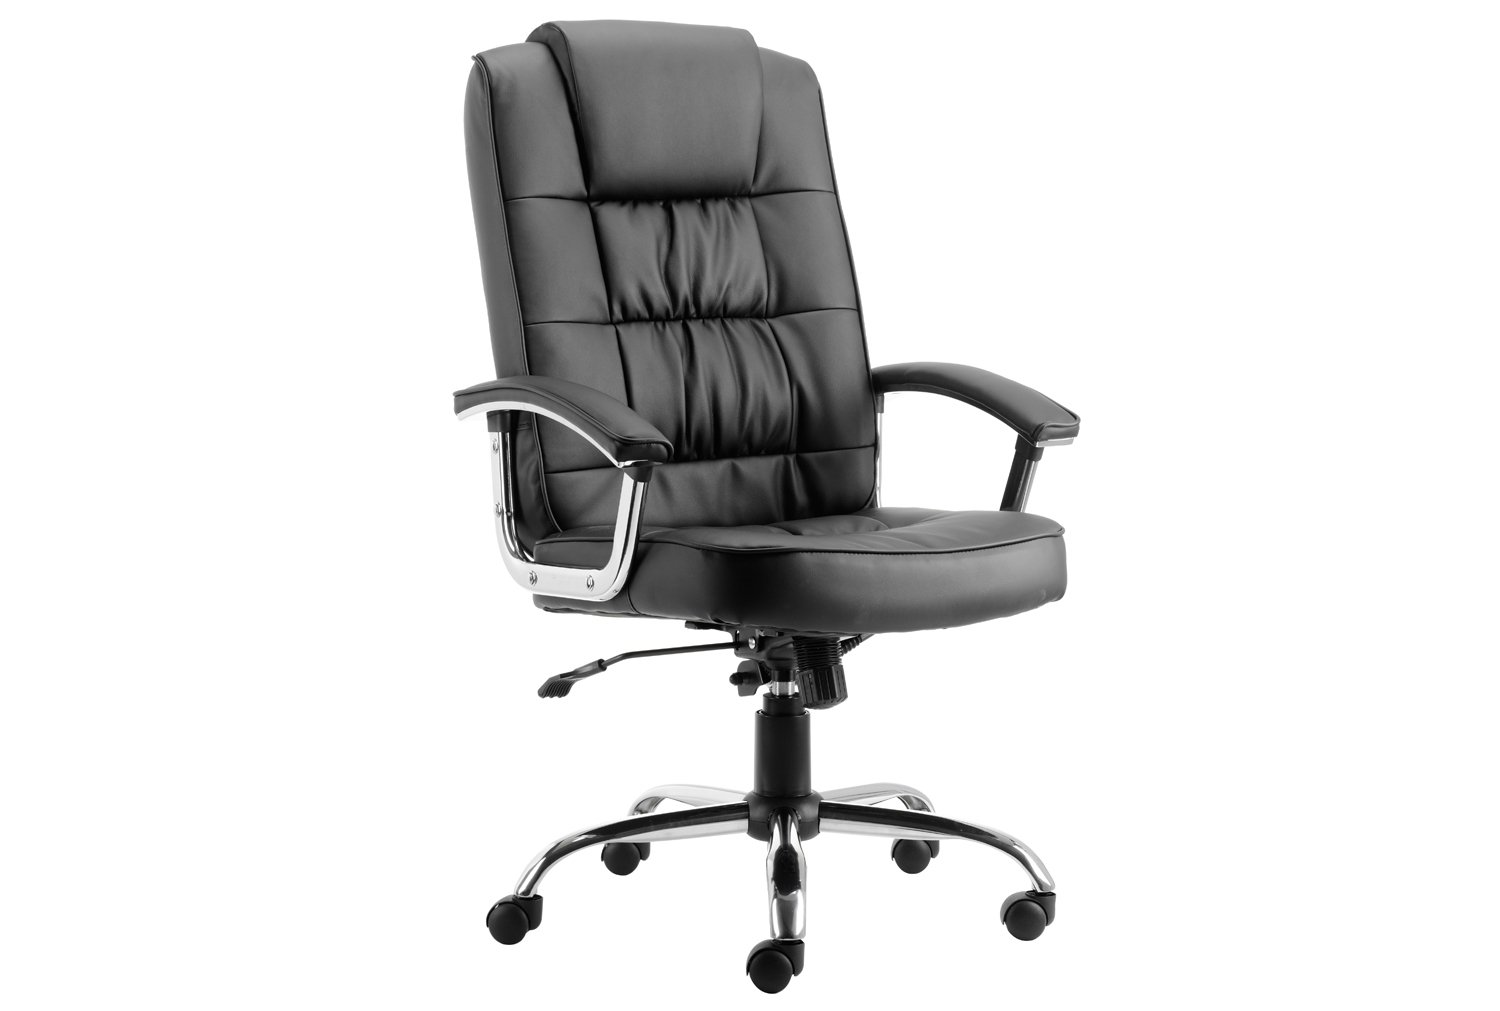 Muscat Deluxe Executive Leather Office Chair, Black, Express Delivery